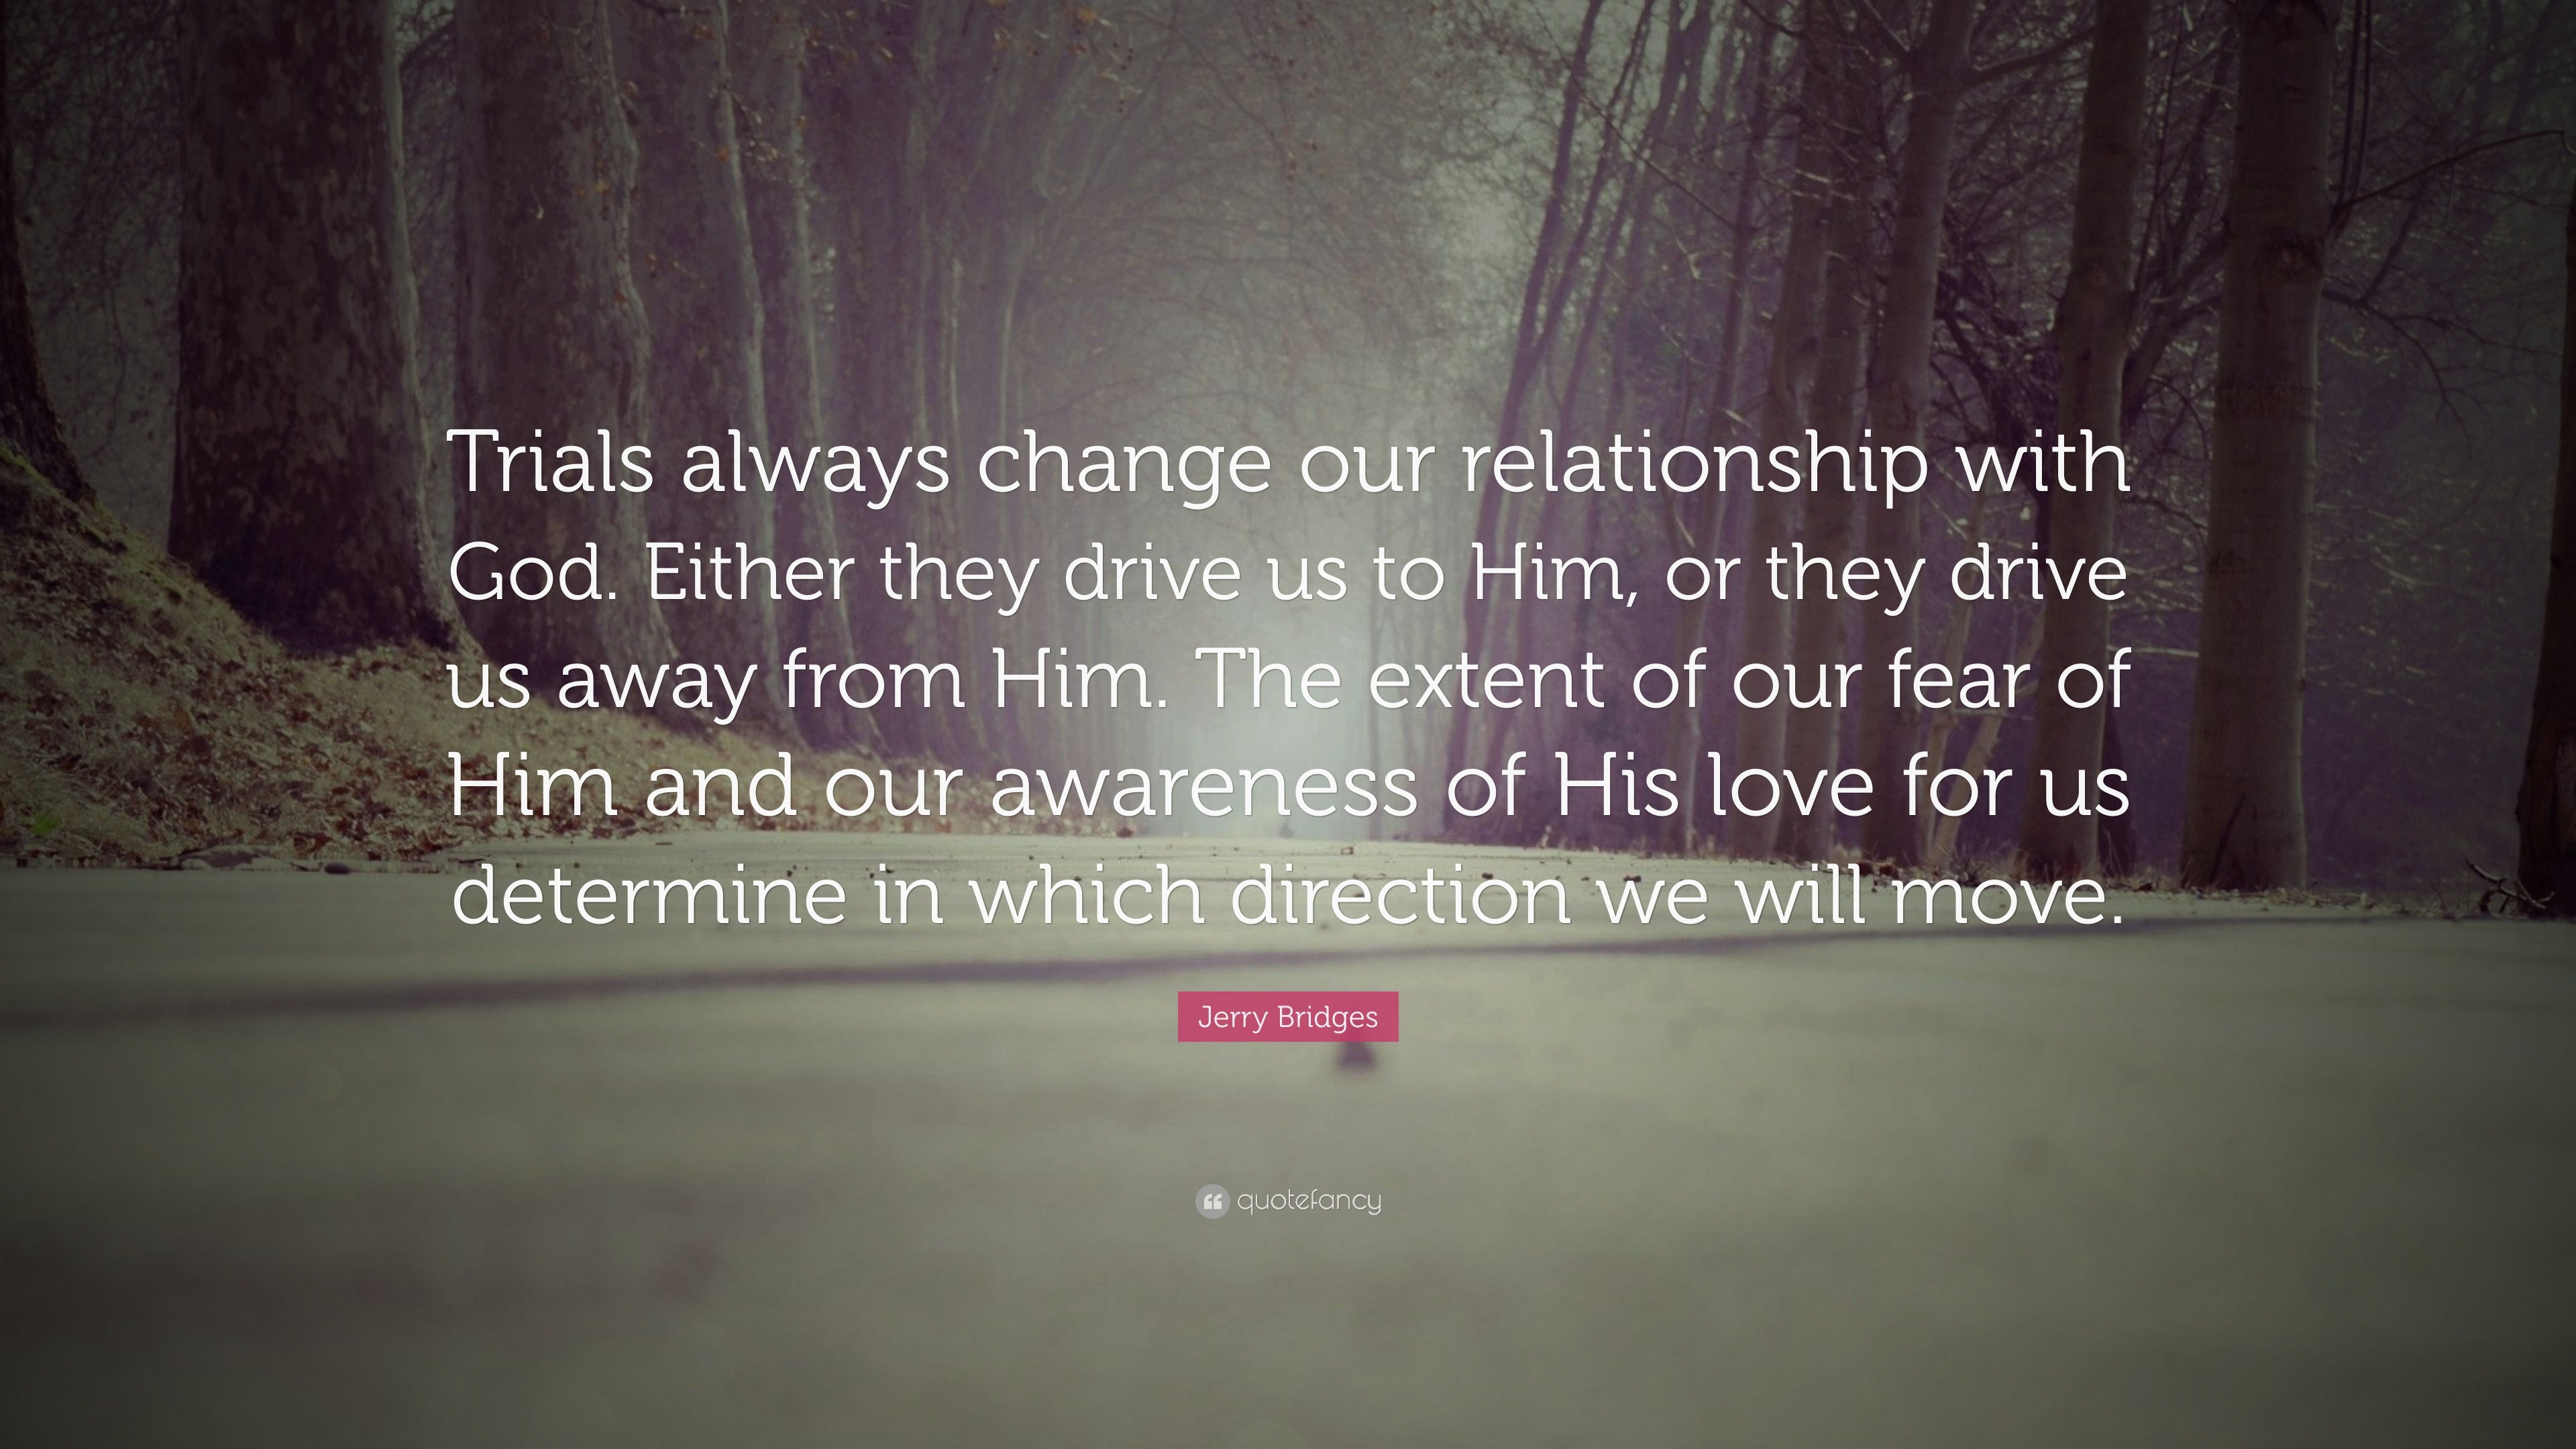 Jerry Bridges Quote “Trials always change our relationship with God Either they drive